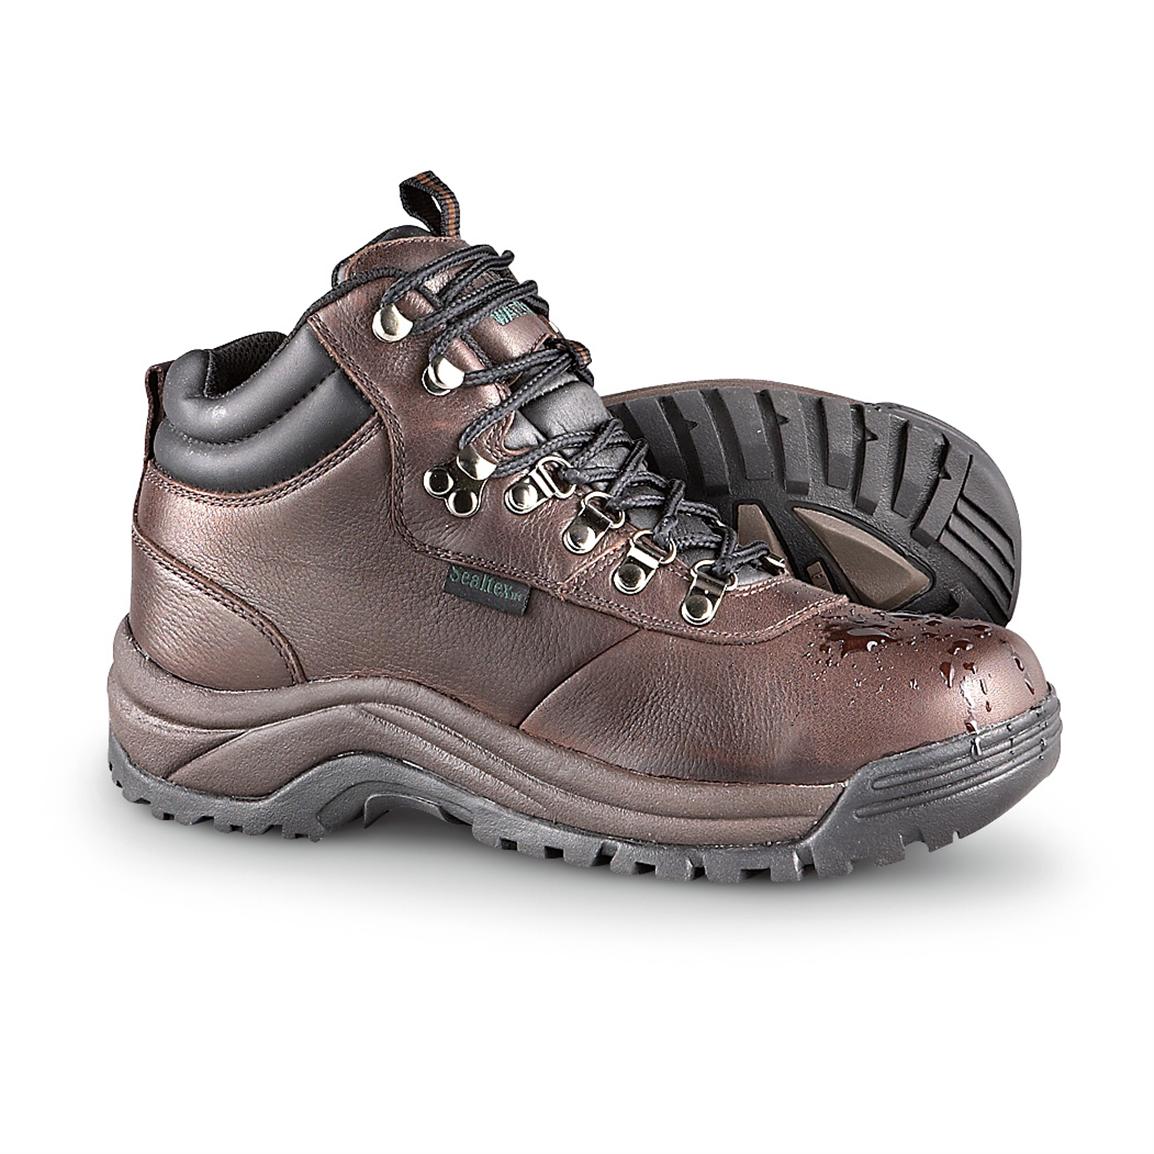 s discount hiking boots - 28 images - buy discount canada s shoes ...